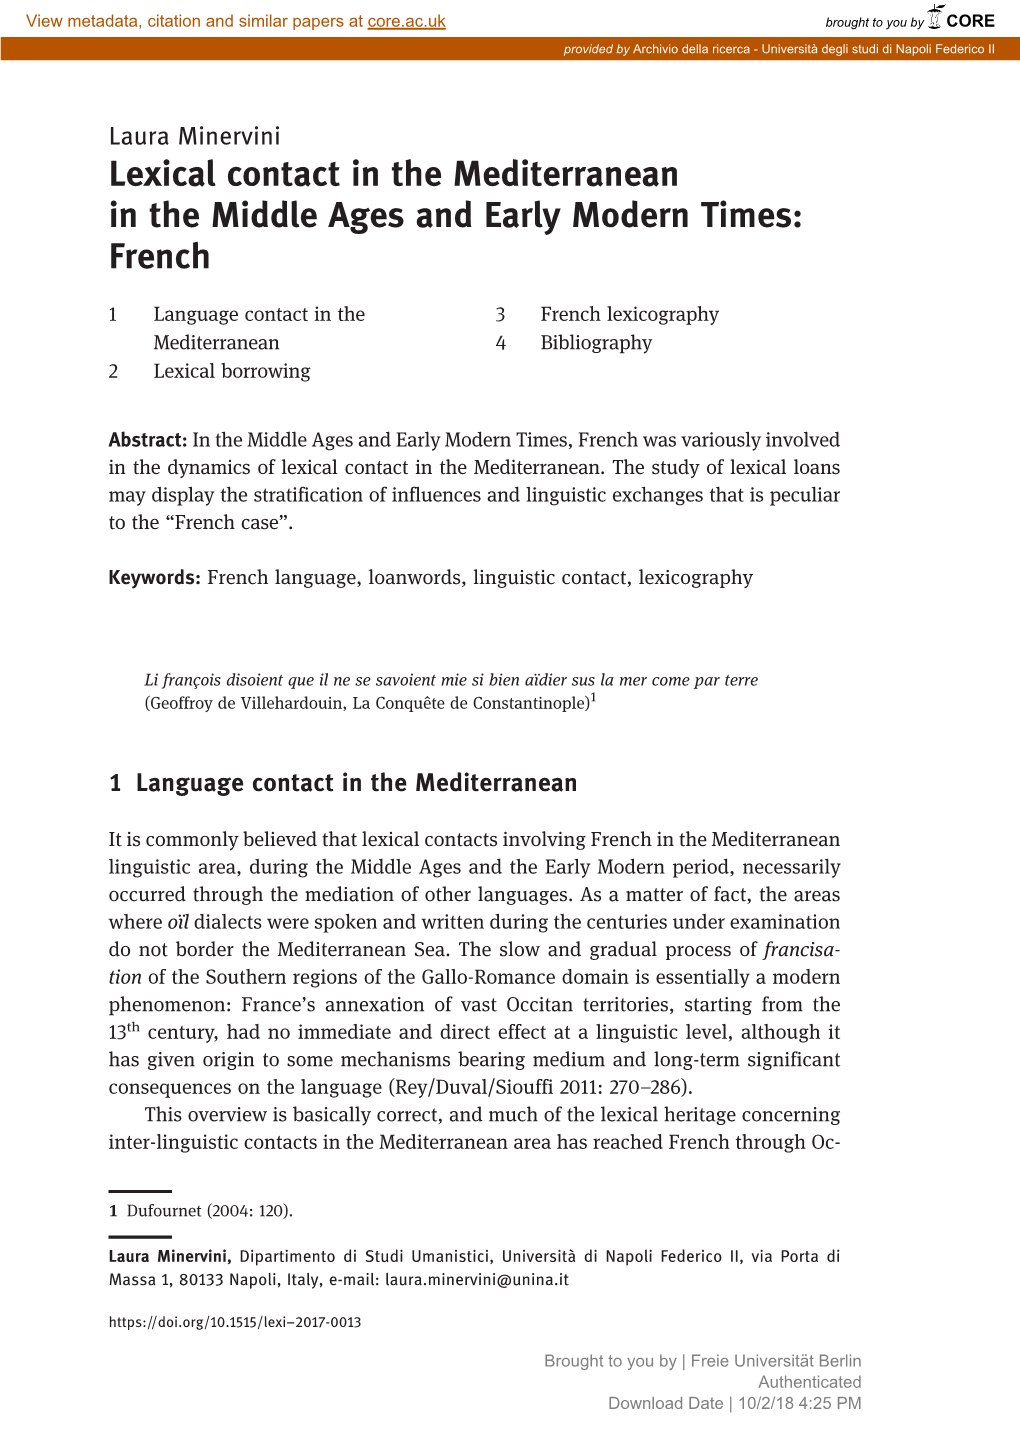 Lexical Contact in the Mediterranean in the Middle Ages and Early Modern Times: French